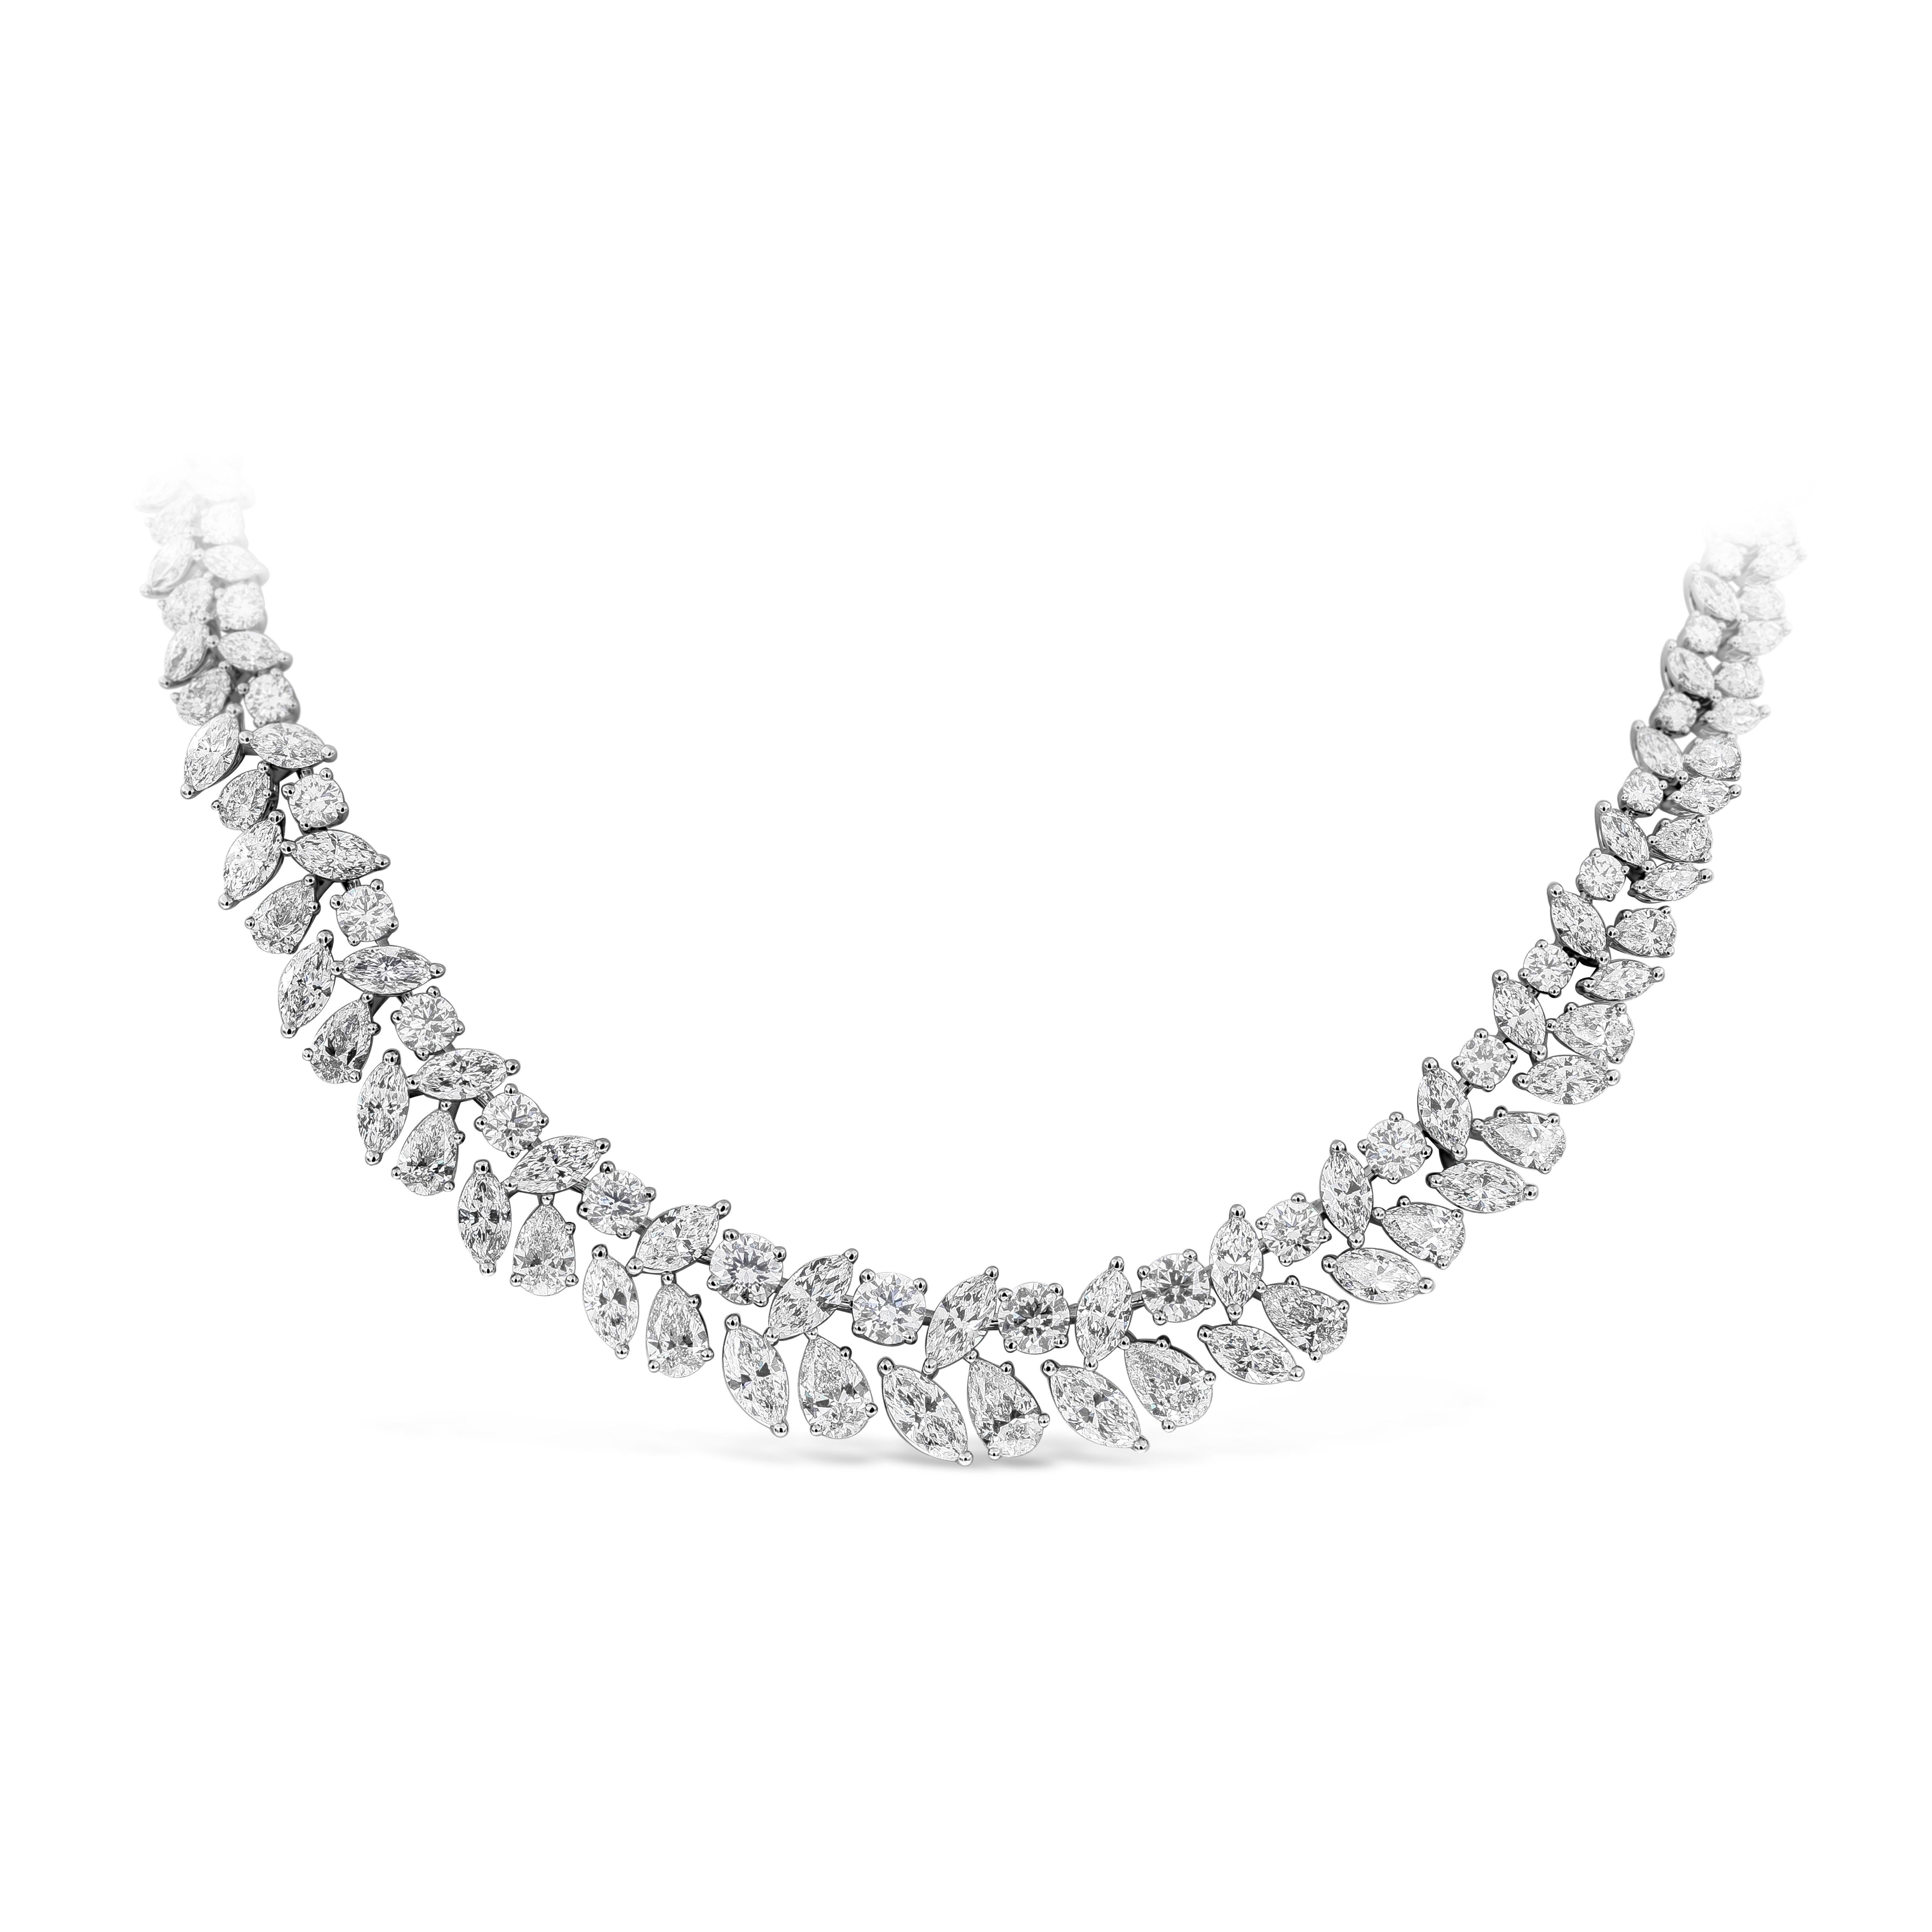 A brilliant necklace showcasing two rows of marquise, pear and round shape diamonds, hand-crafted in an 18K white gold mounting. Diamonds weigh 51.48 carats total, F-G color and VS-SI in clarity. Absolutely stunning work of art.